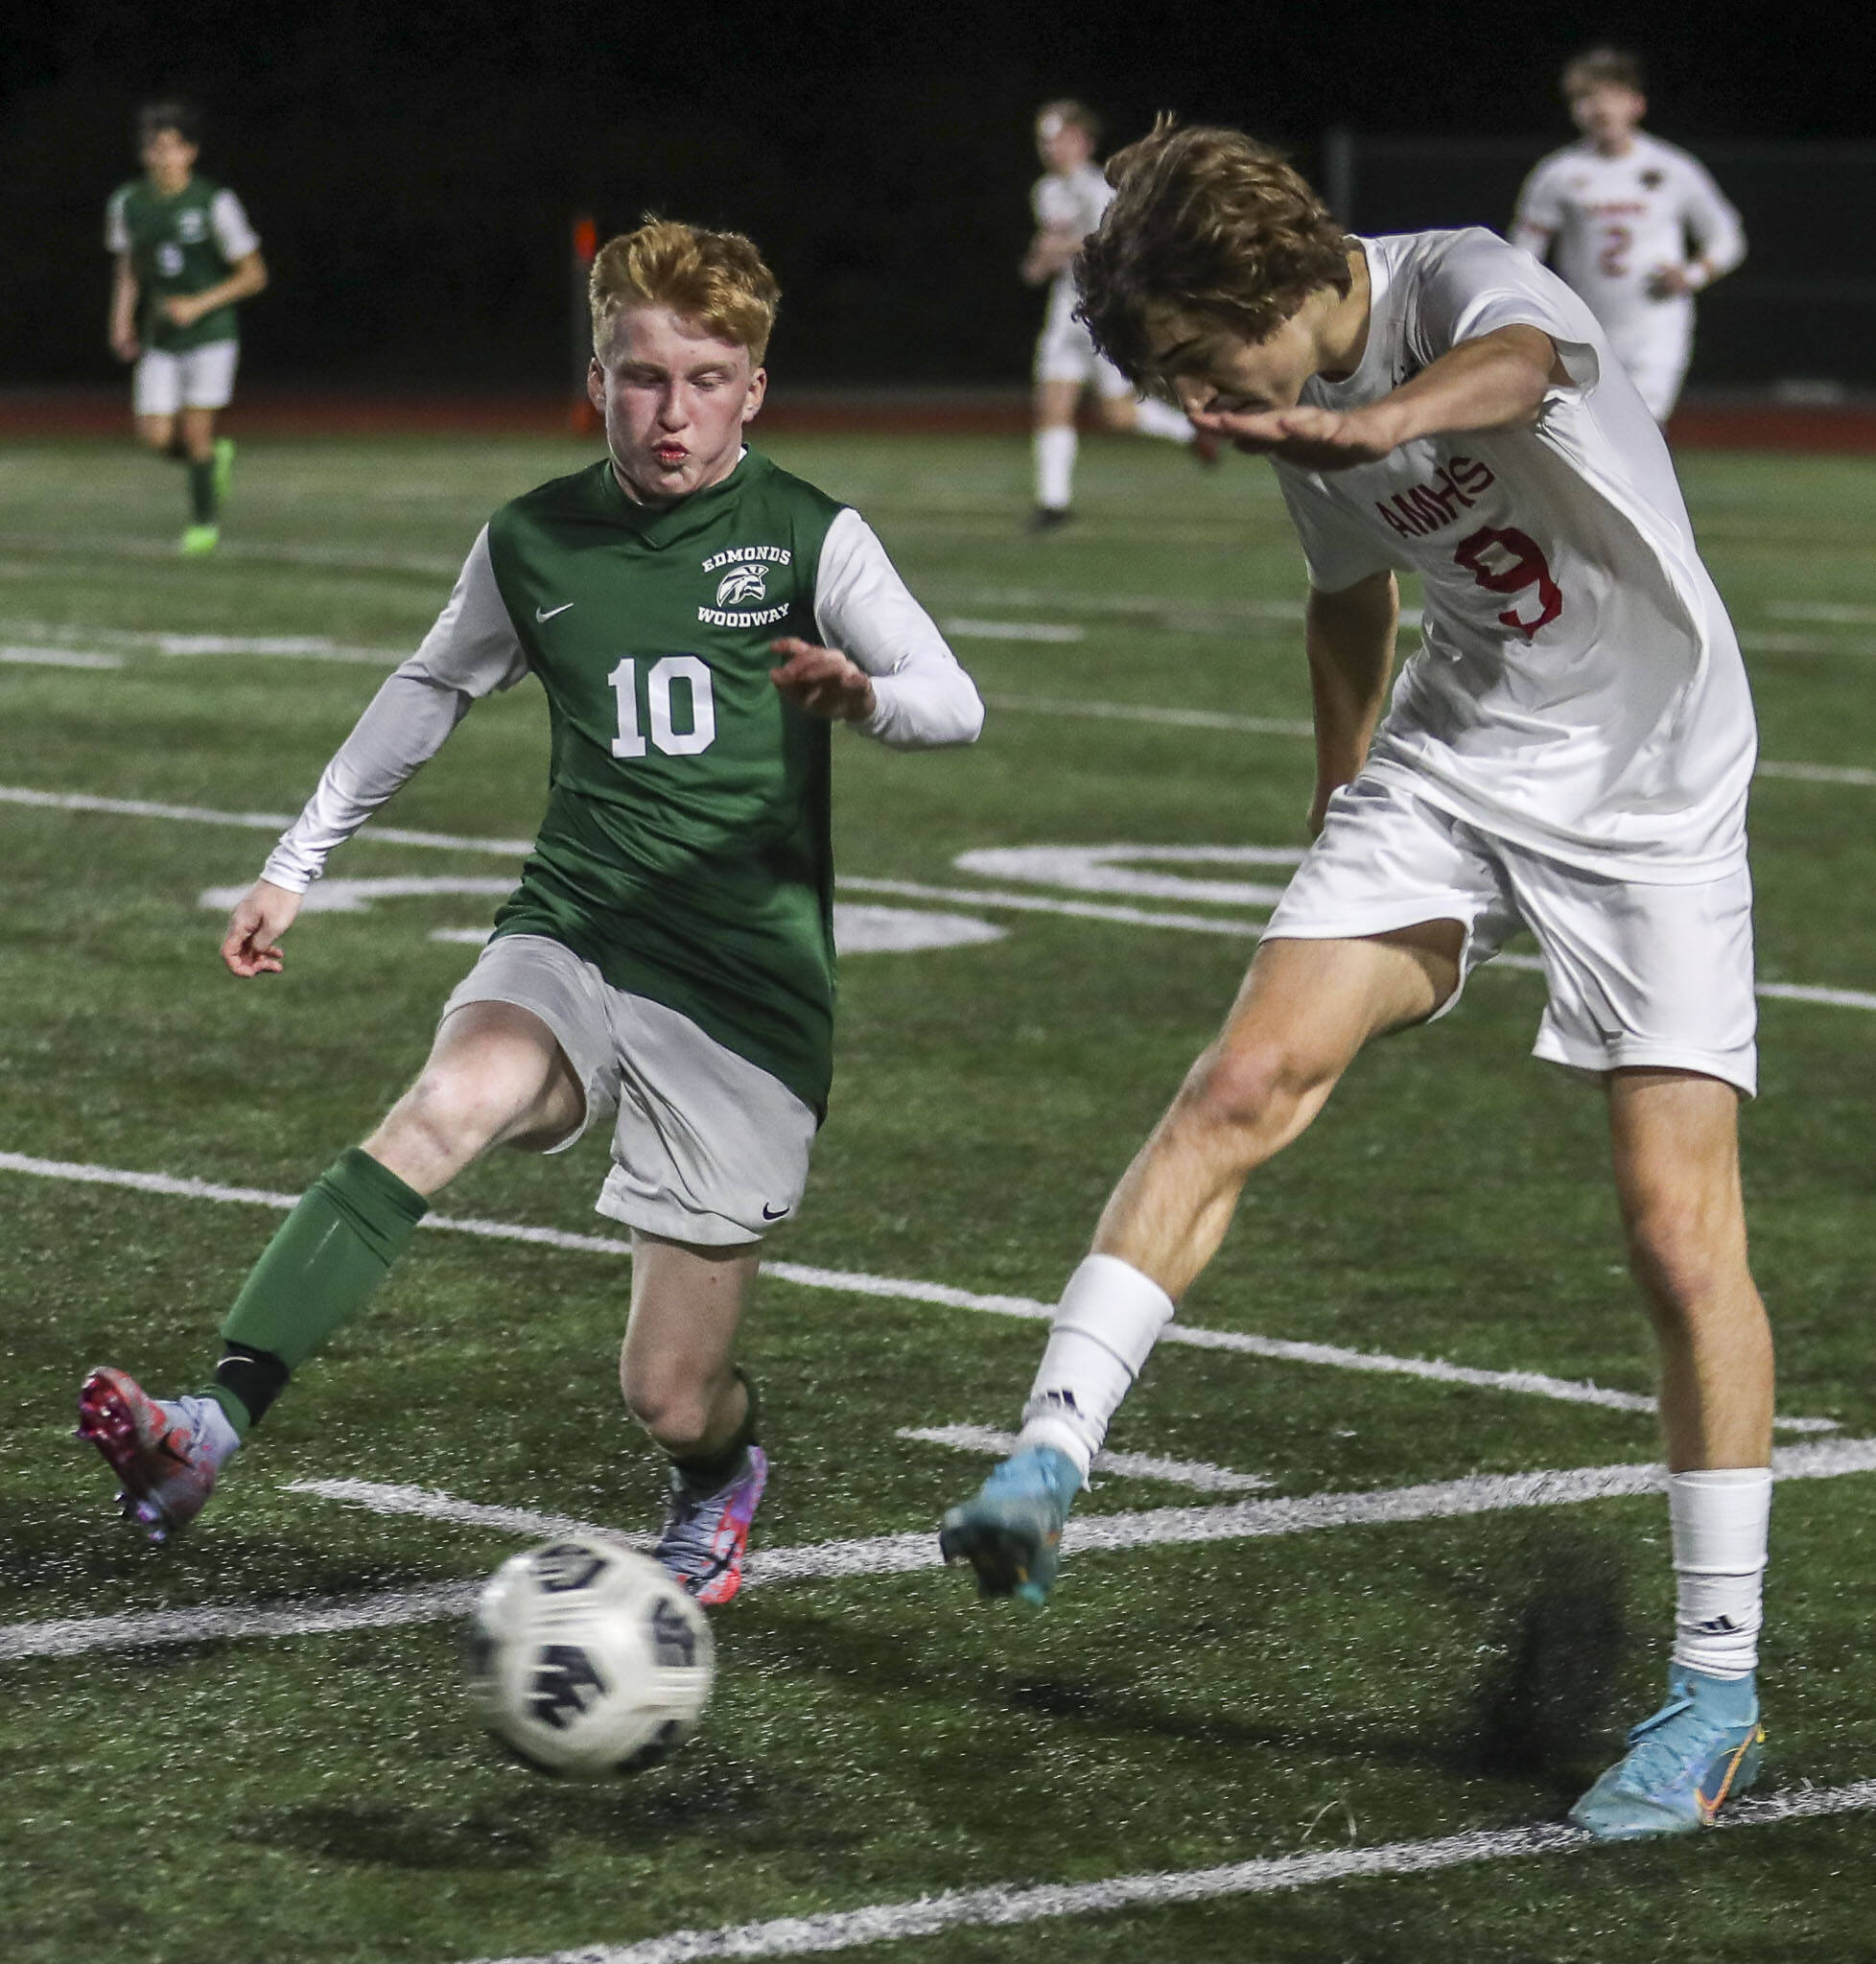 Edmonds-Woodway’s Ben Hanson (10) and Archbishop Murphy’s Zach Mohr (9) fight for the ball during a boys soccer match at Edmonds-Woodway High School. (Annie Barker / The Herald)